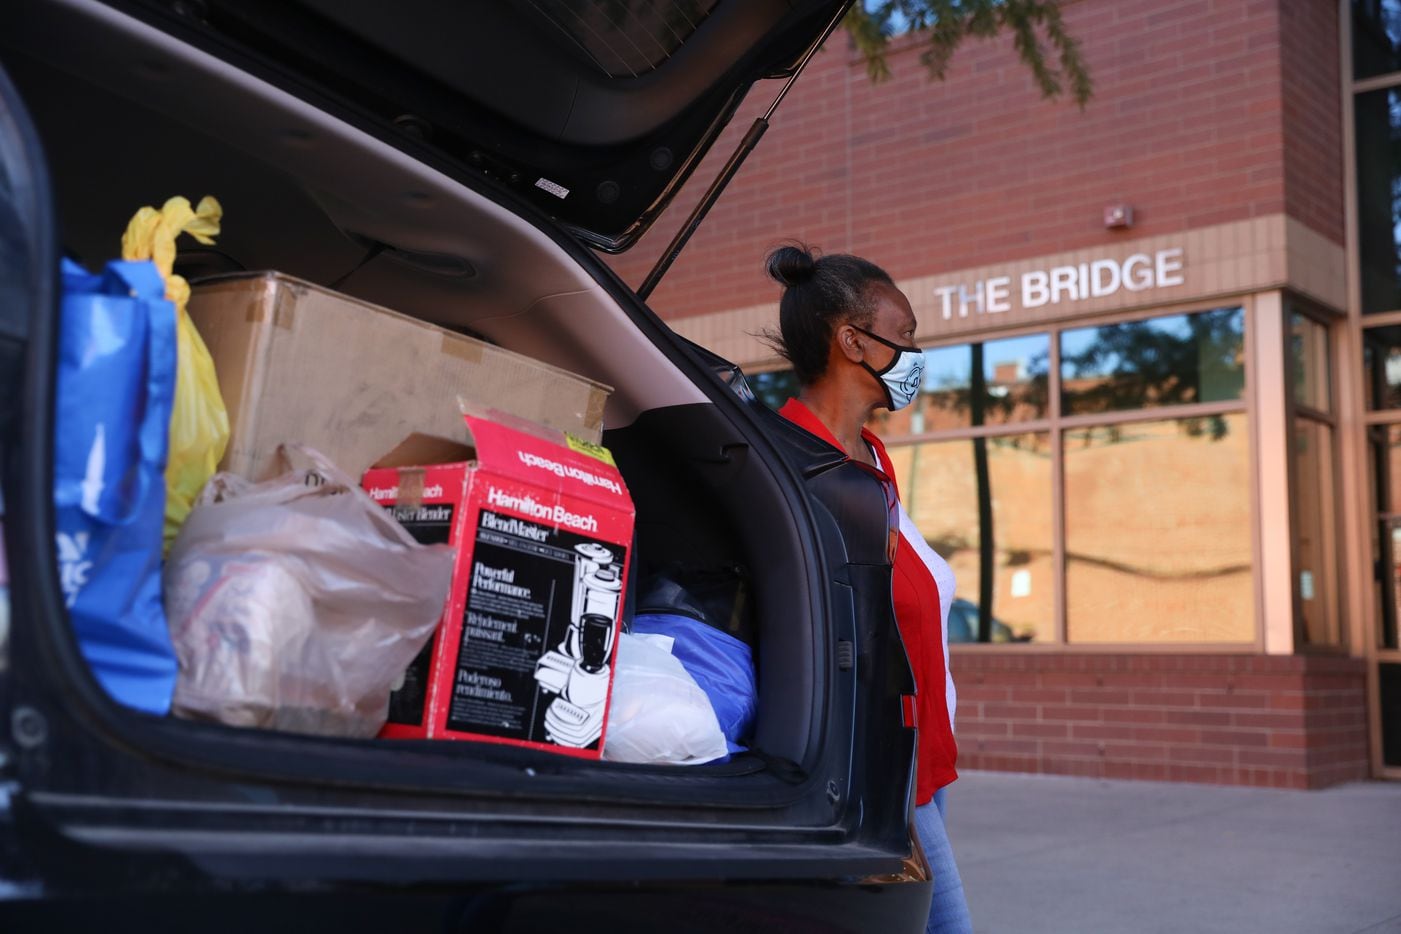 Patricia Freeman by a car filled with her belongings outside of The Bridge Homeless Recovery Center on November 19, 2021, waiting to depart for her new apartment. Freeman got help getting her new home through the Dallas Rapid Rehousing program. (Liesbeth Powers/Special Contributor)